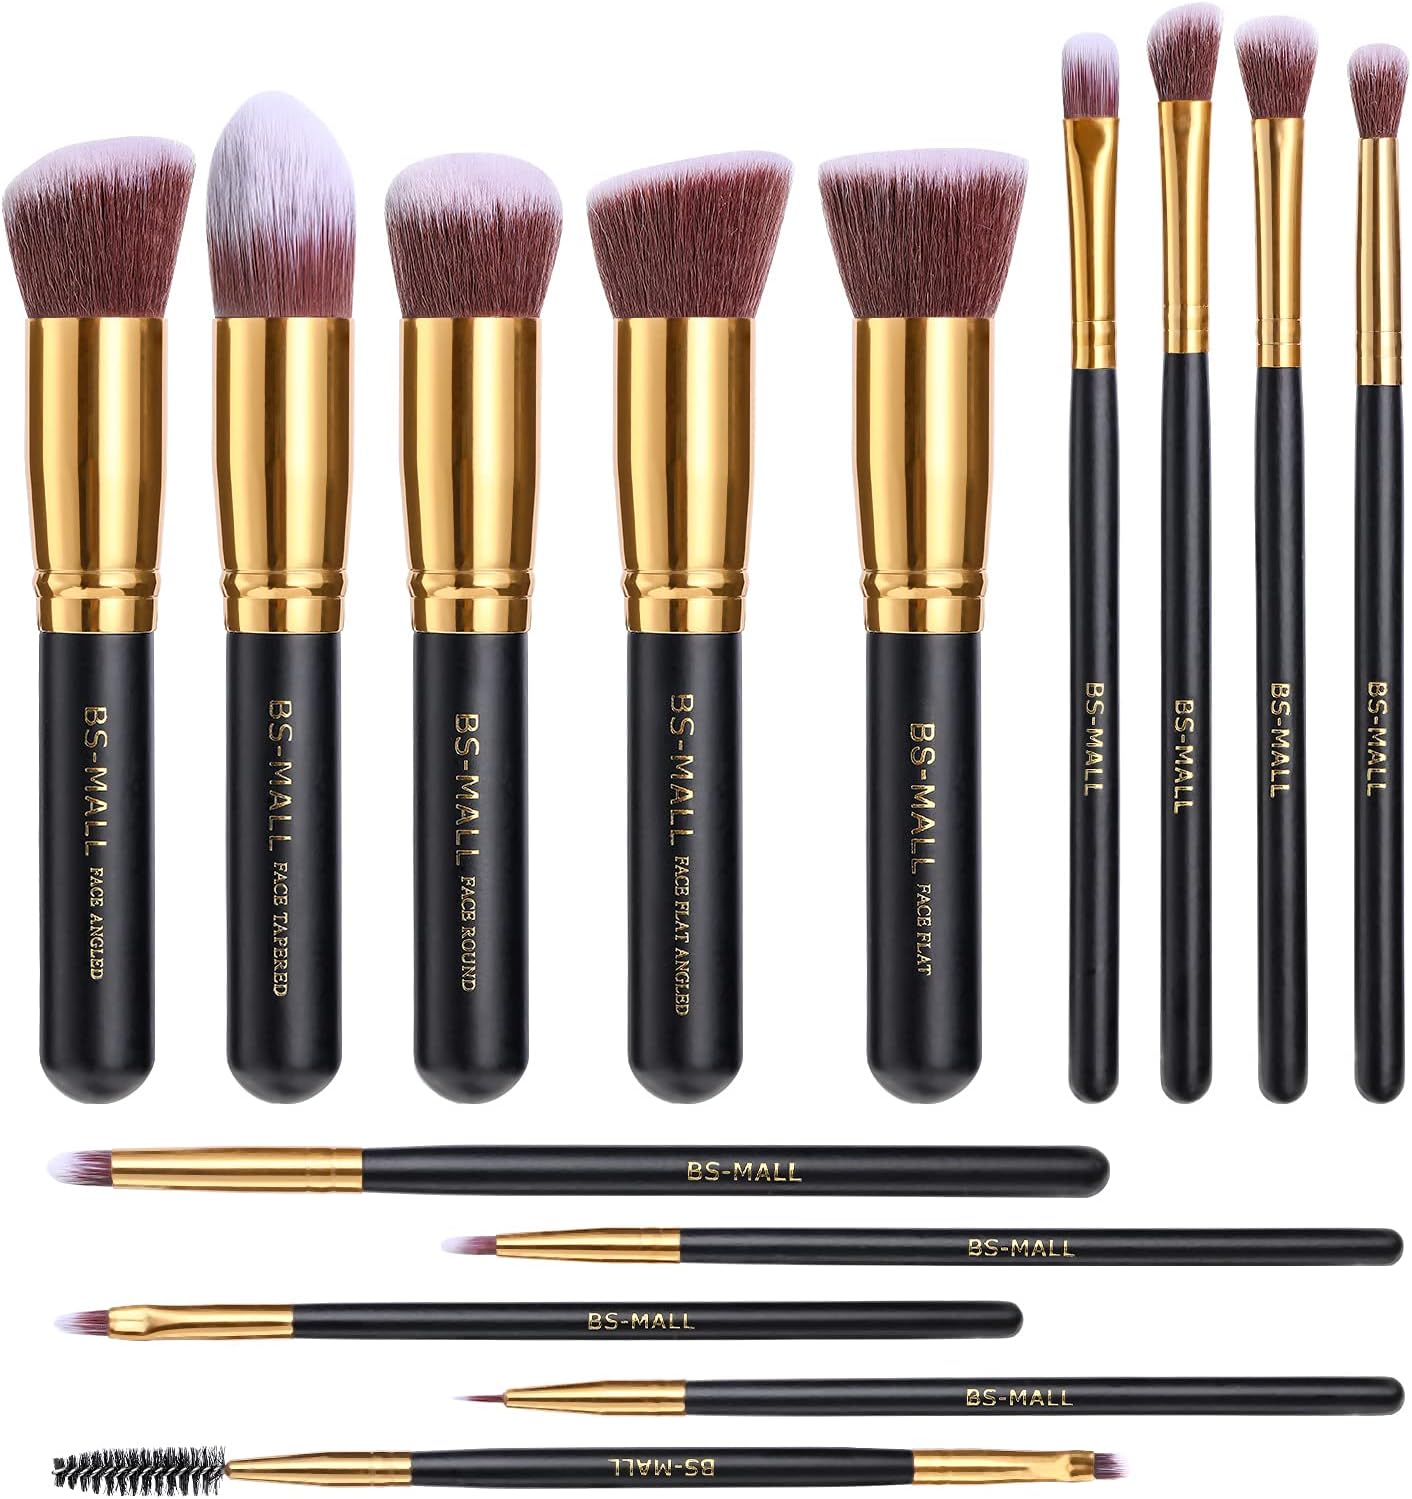 BS-MALL Makeup Brushes Premium Synthetic Foundation Powder Concealers Eye Shadows Makeup 14 Pcs Brush Set, Rose Golden, with Case